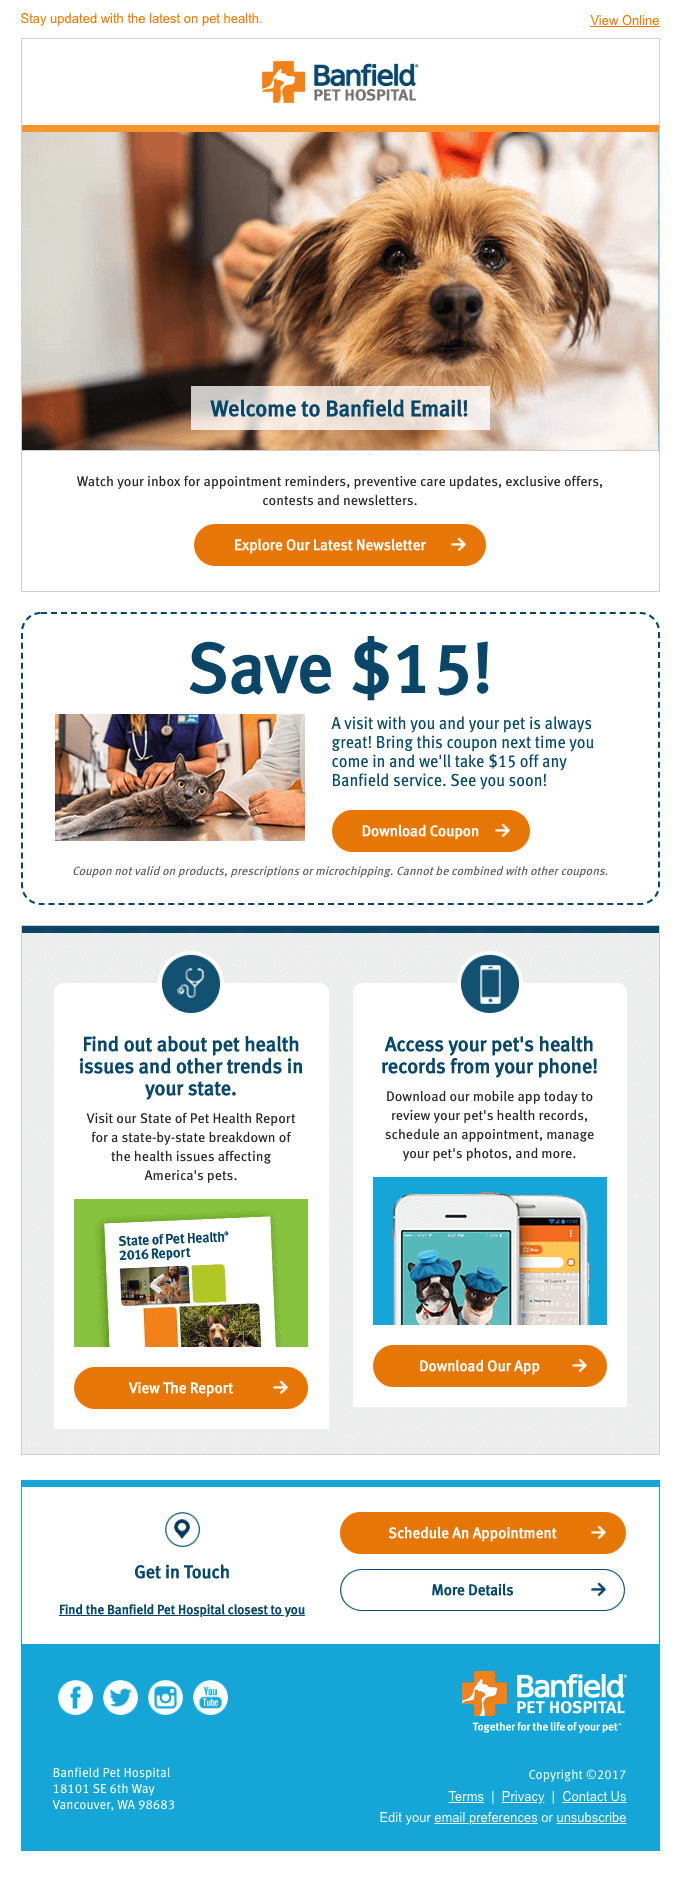 welcome email from banfield pet hospital gives options to explore past newsletters, to use coupons, and to download their app